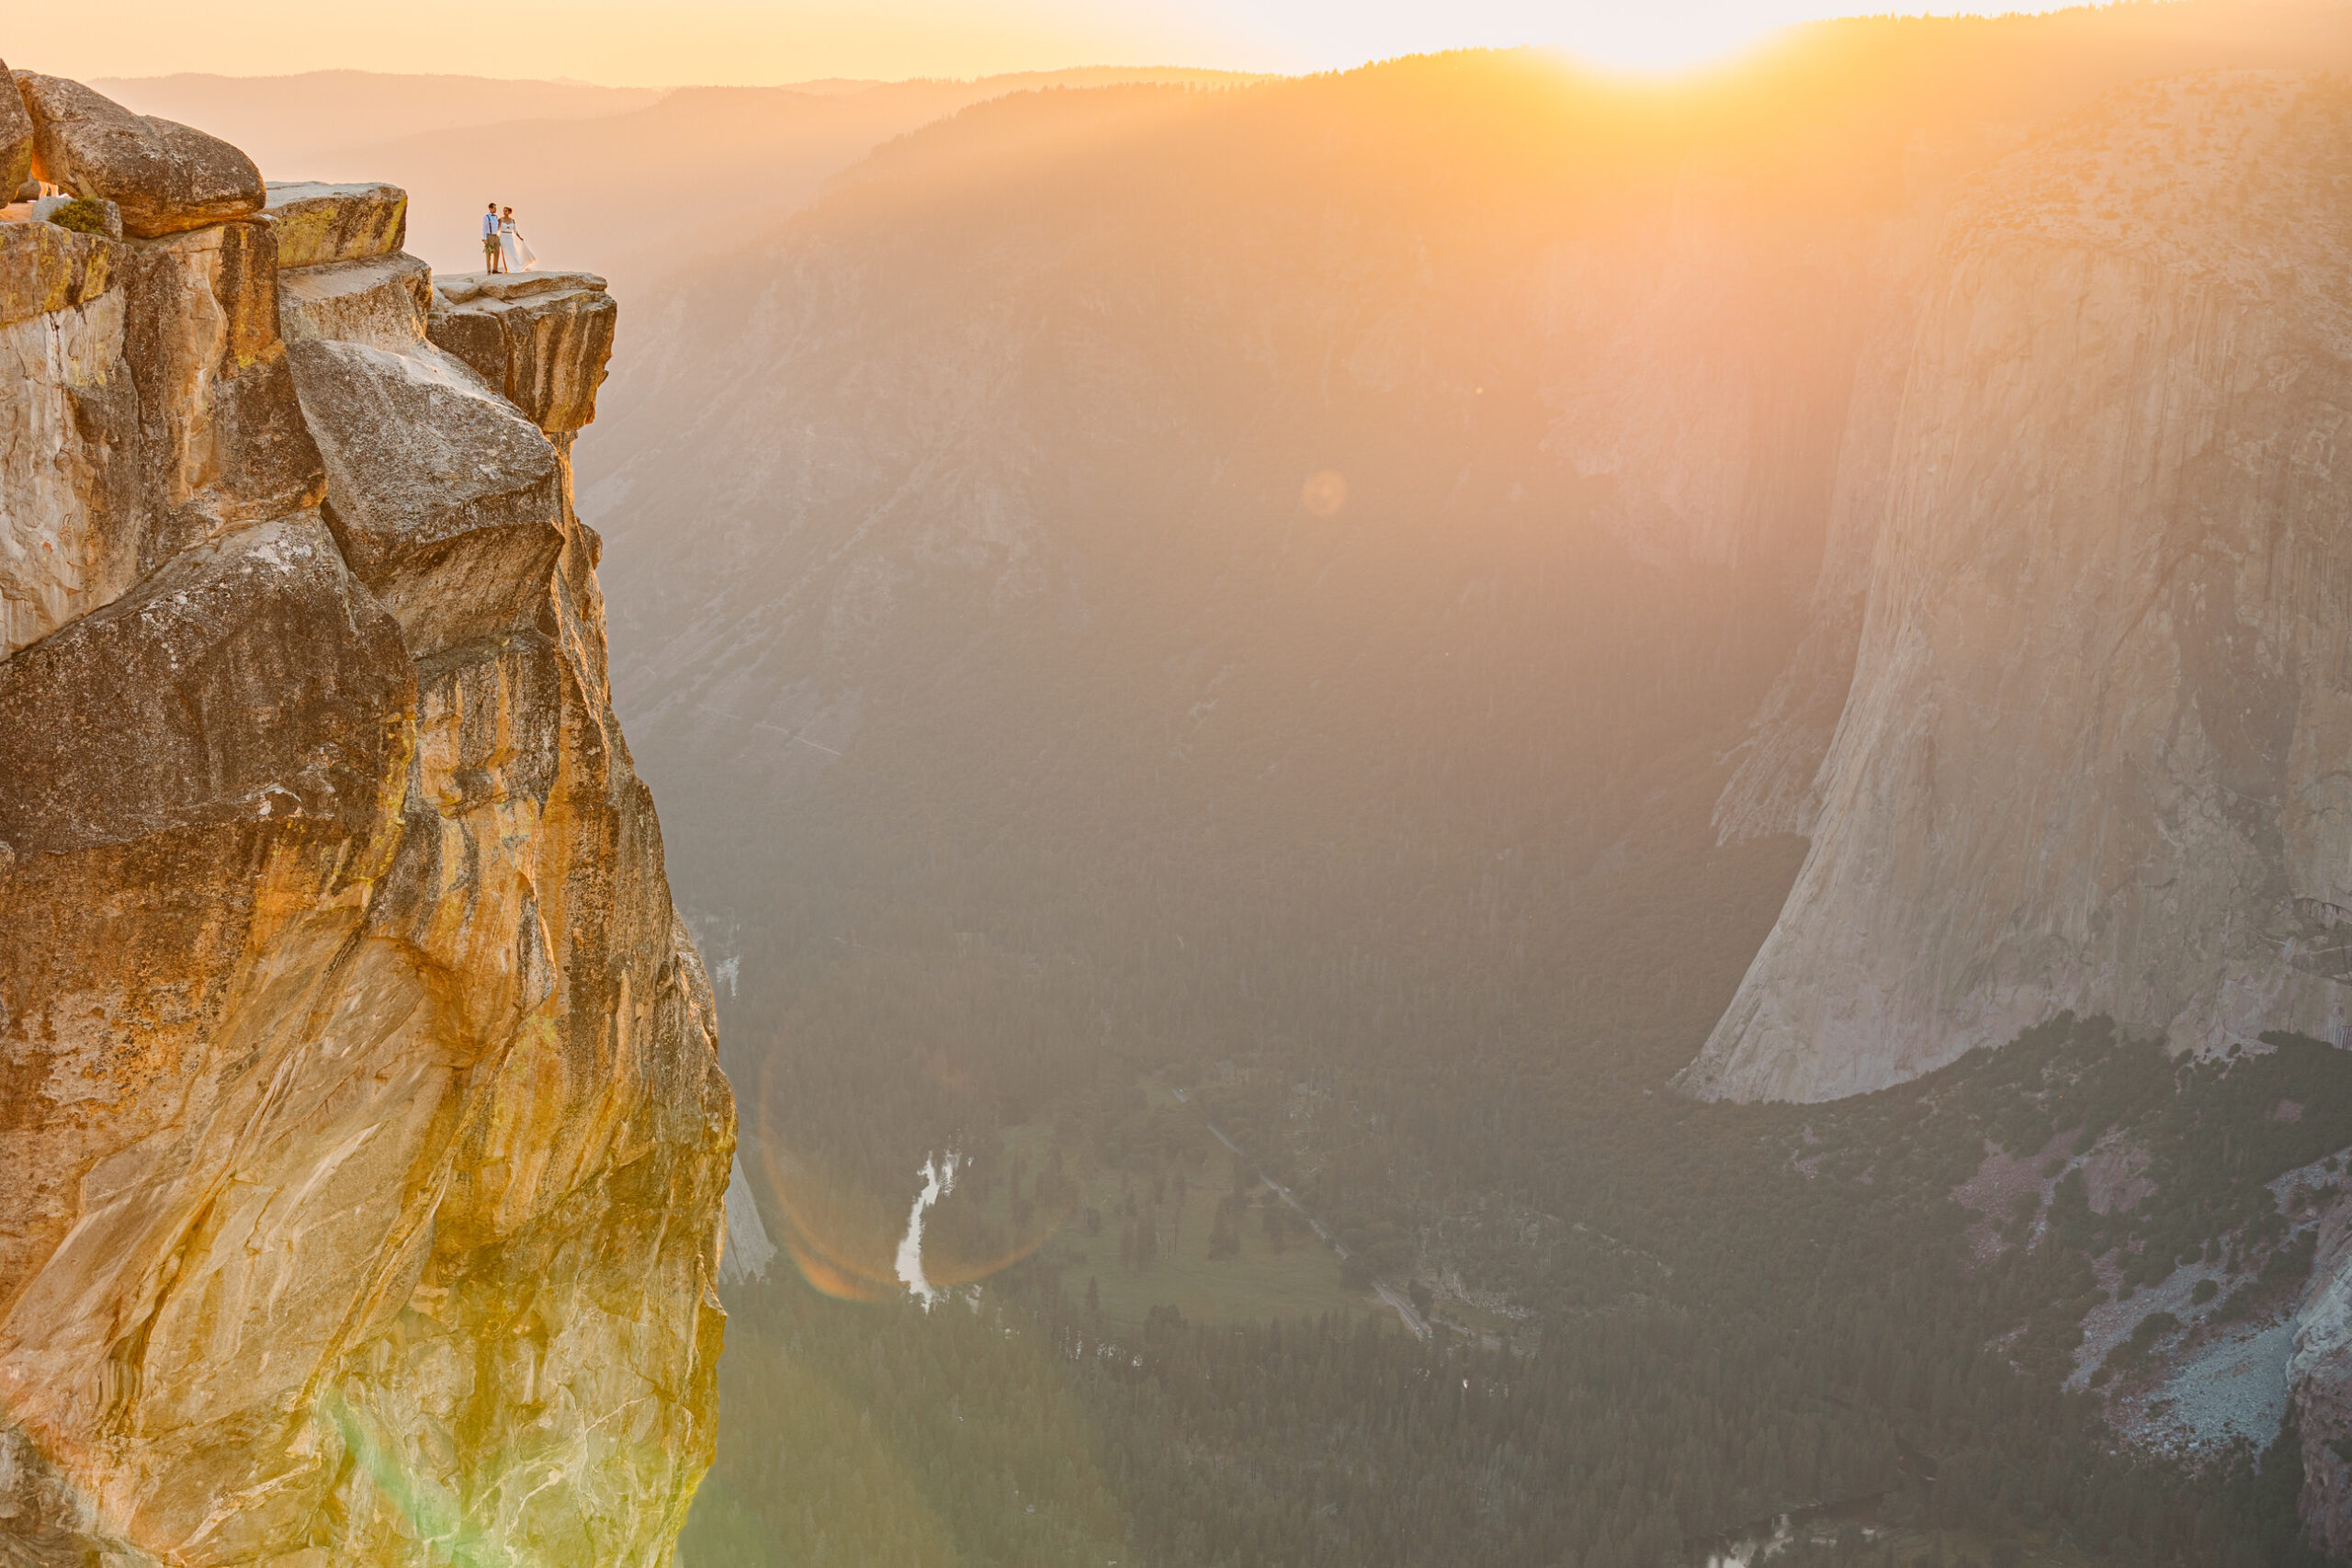 Dramatic cliffside sunset image with pink and orange skies at Taft Point in Yosemite. Bride and Groom dancing on the cliff overlooking the Yosemite Valley.